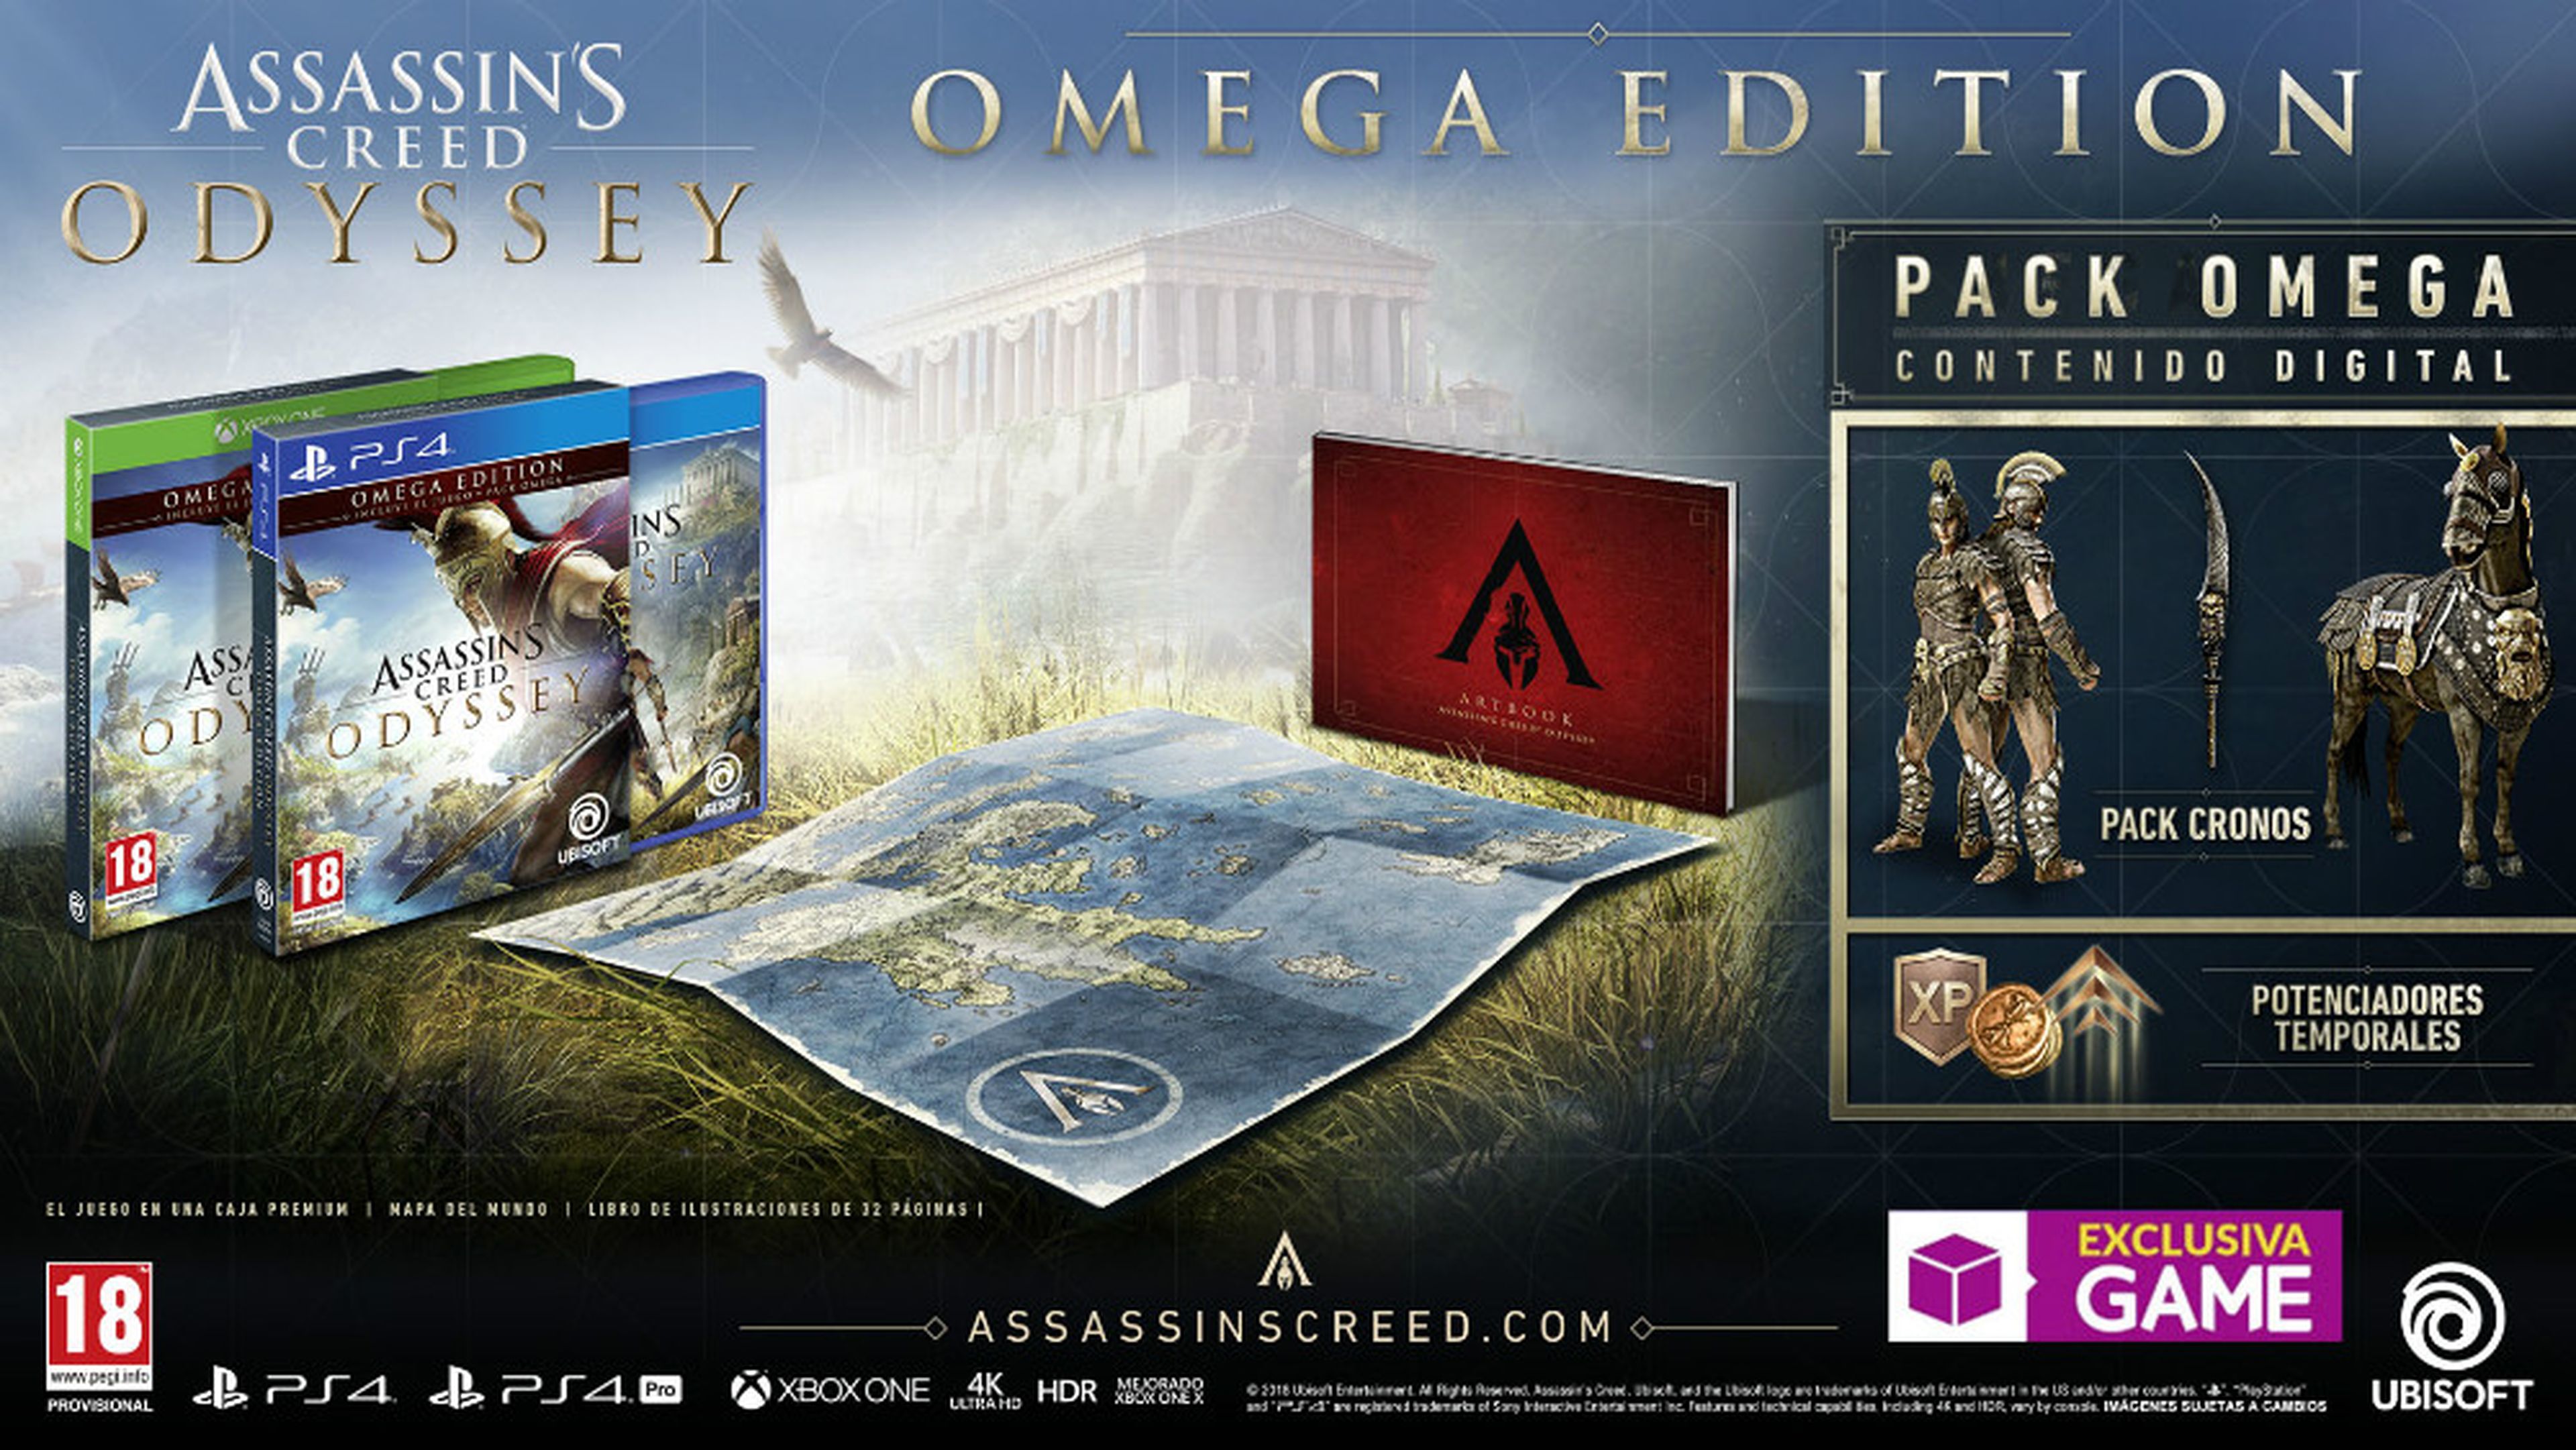 Assassin's Creed Odyssey Omega Edition en GAME